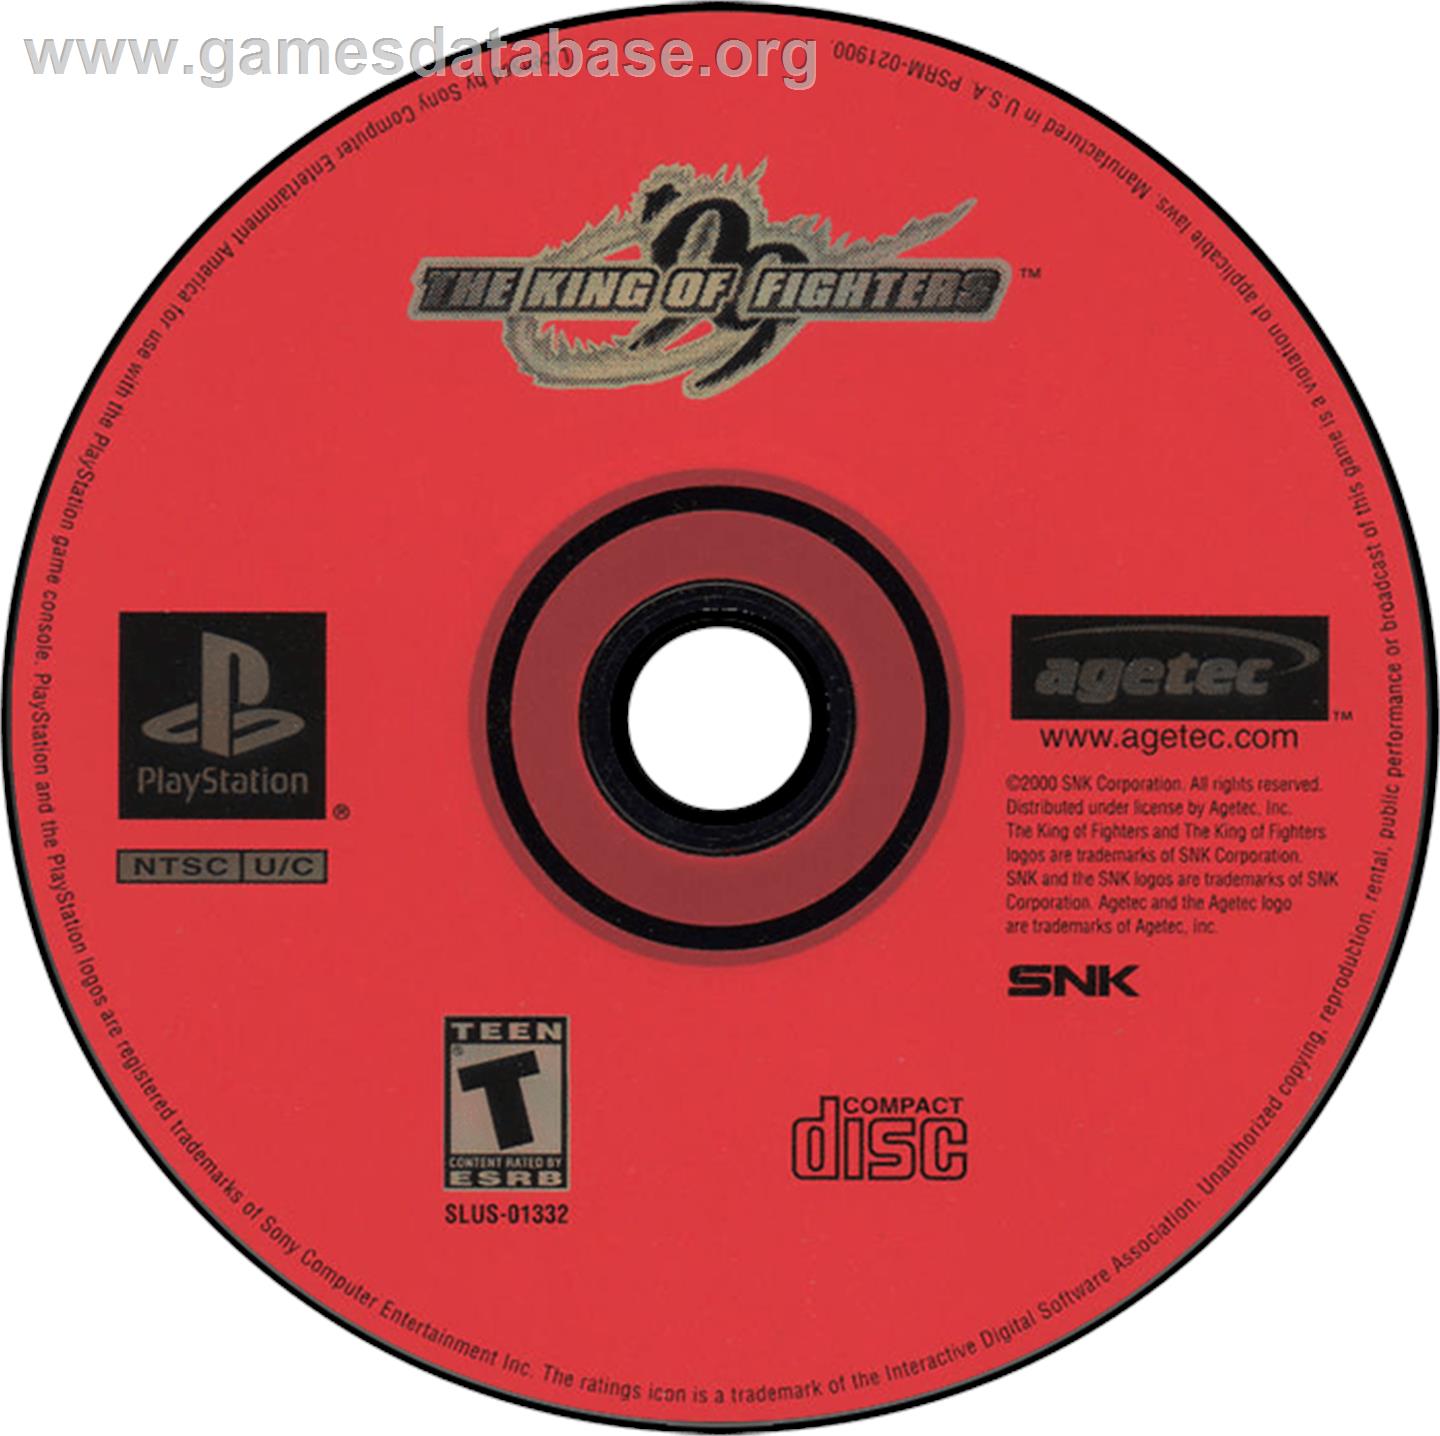 The King of Fighters '99 - Sony Playstation - Artwork - Disc